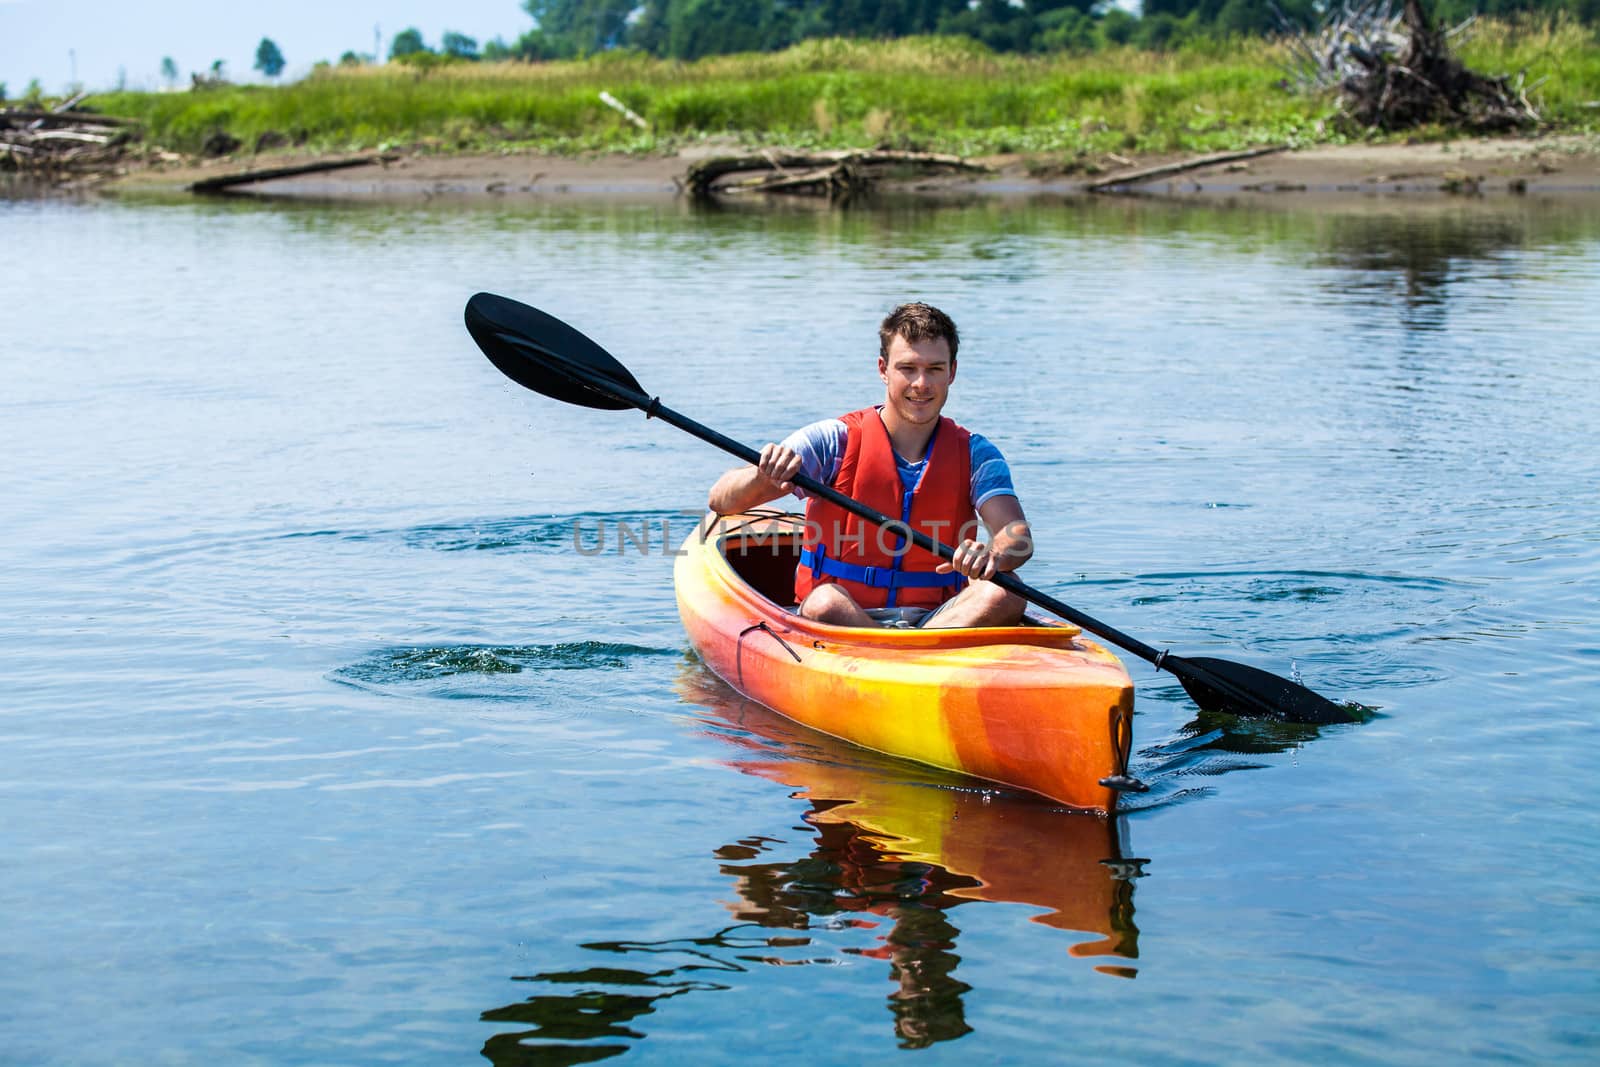 Man With Safety Vest Kayaking Alone on a Calm River by aetb